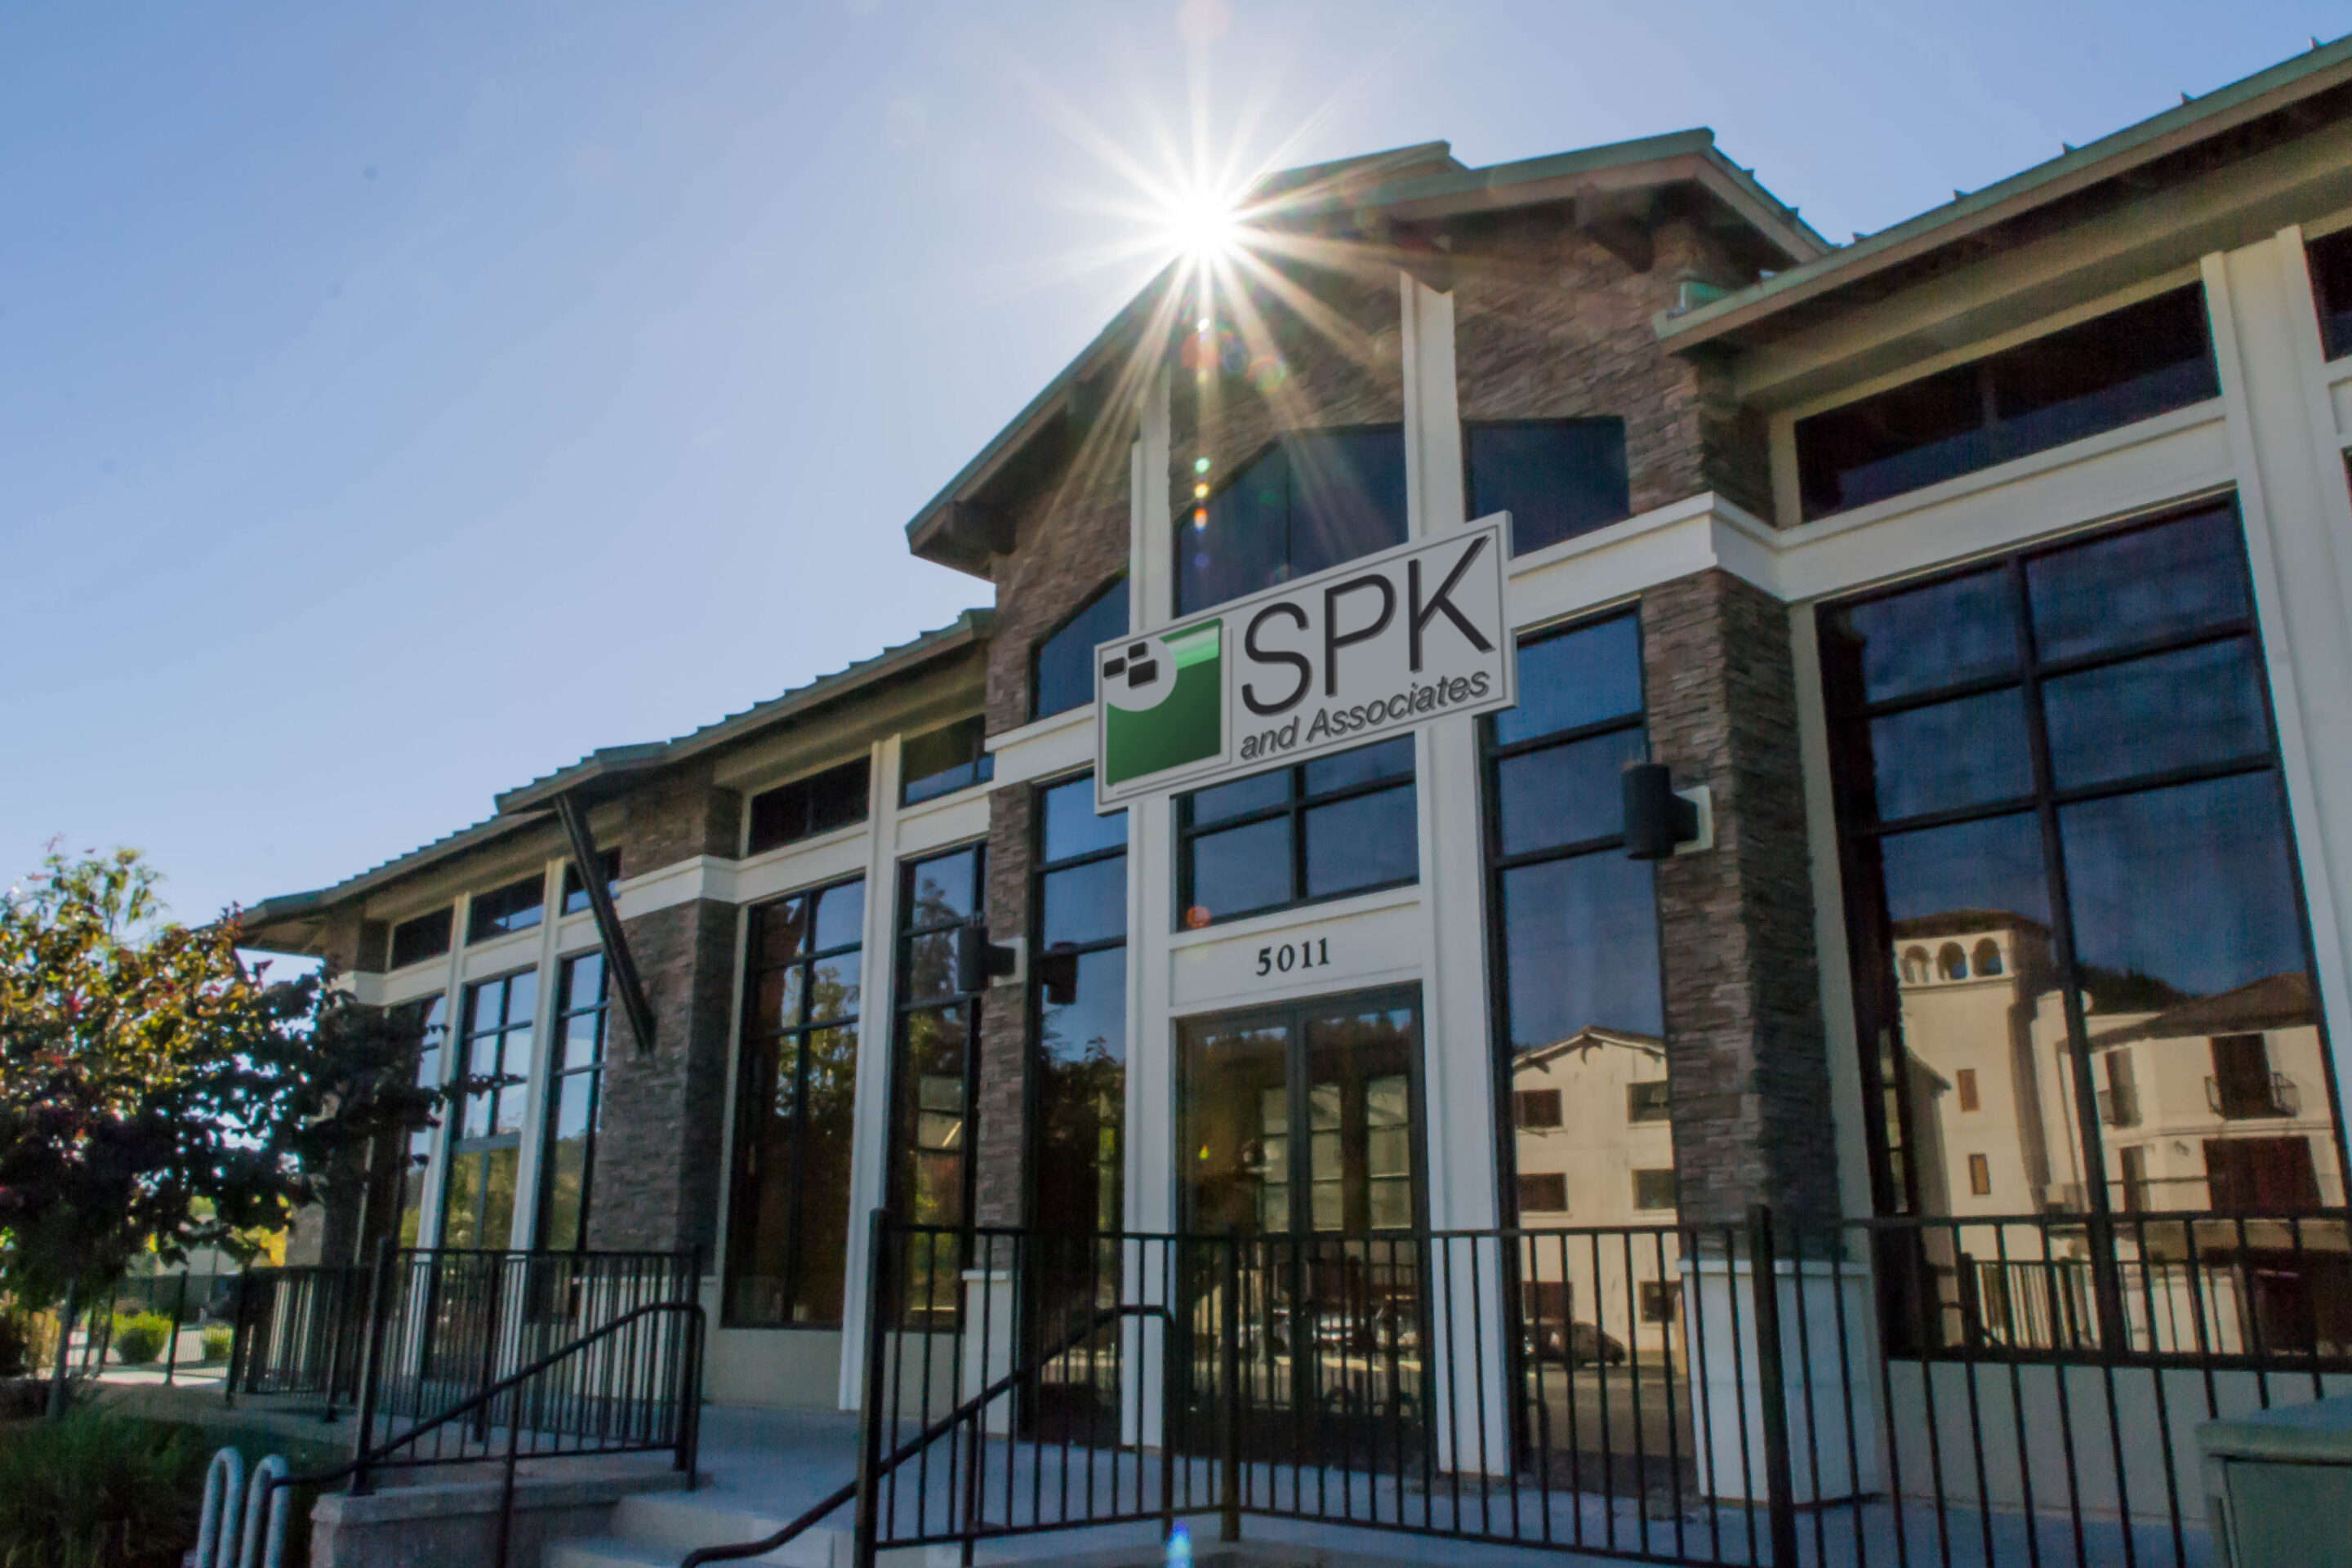 SPK and Associates Headquarters in Scotts Valley, CA